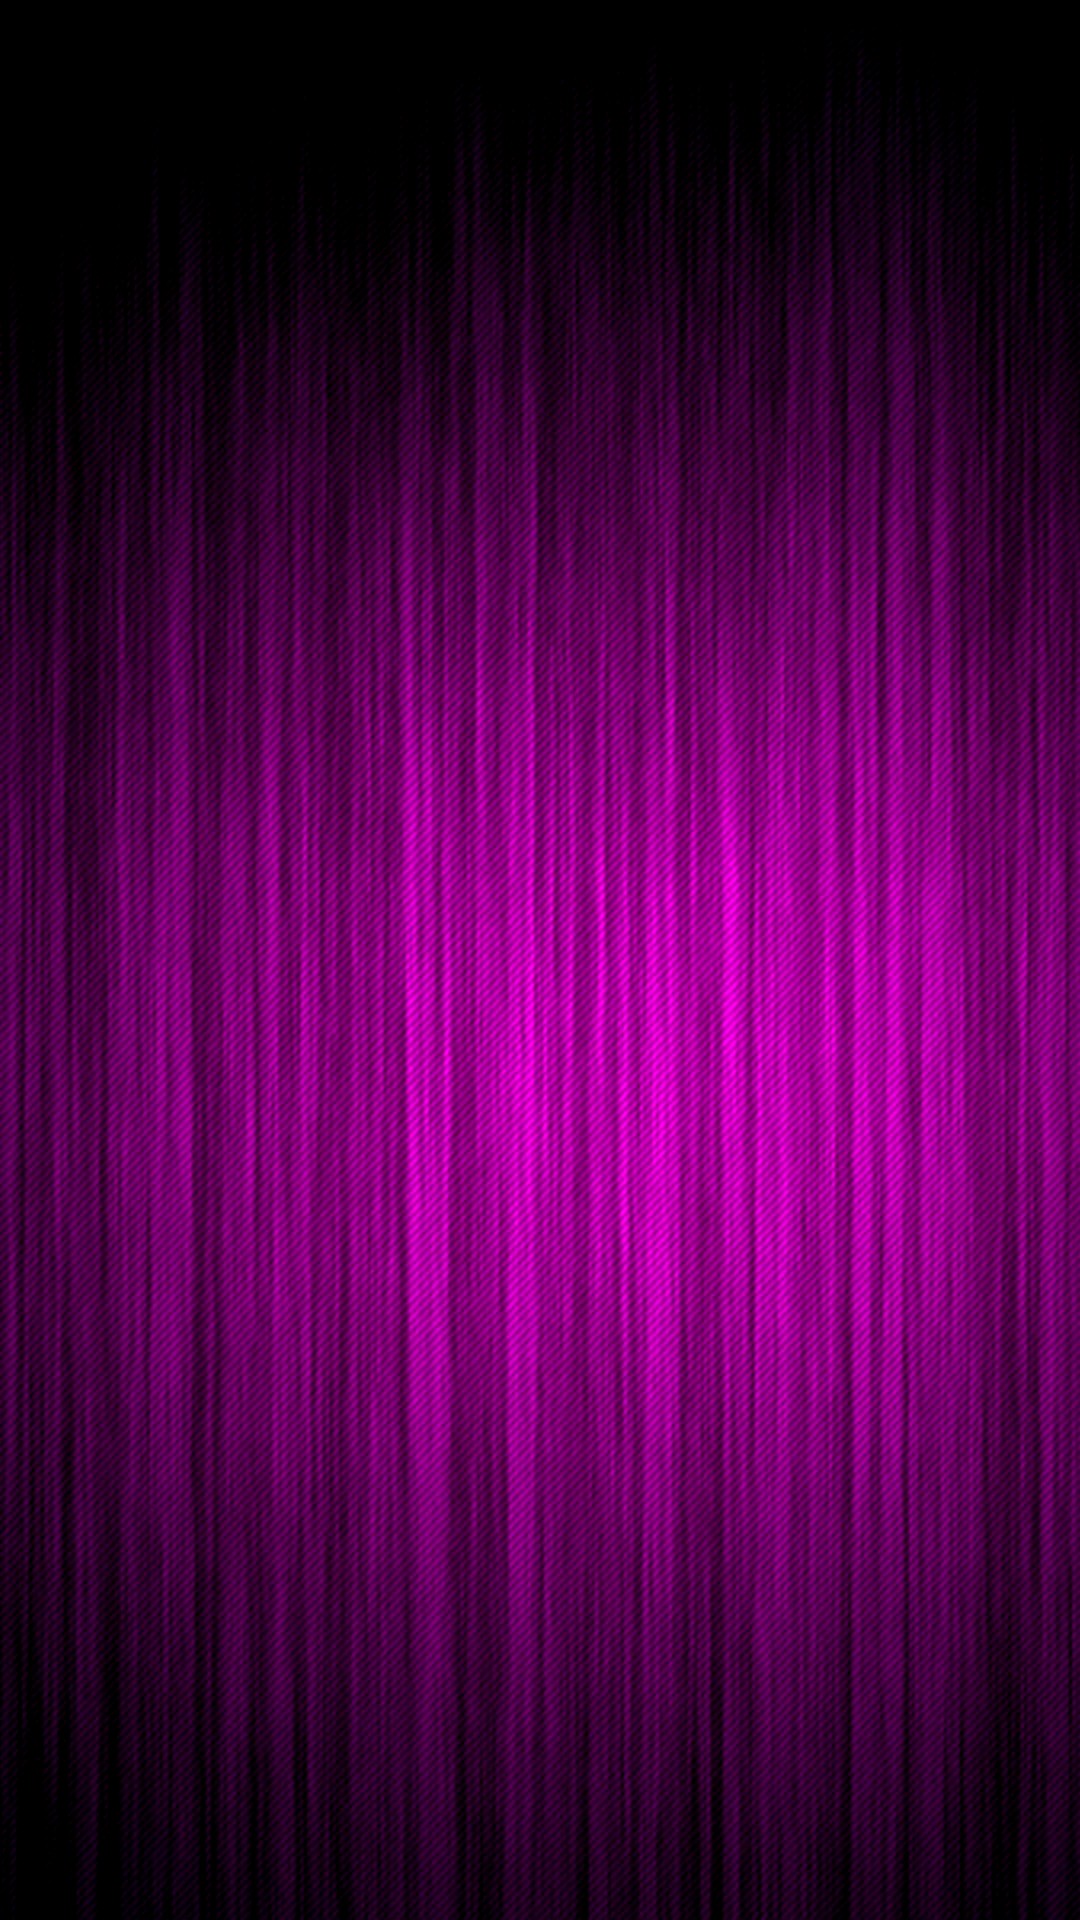 Purple iPhone Wallpaper With high-resolution 1080X1920 pixel. You can set as wallpaper for Apple iPhone X, XS Max, XR, 8, 7, 6, SE, iPad. Enjoy and share your favorite HD wallpapers and background images